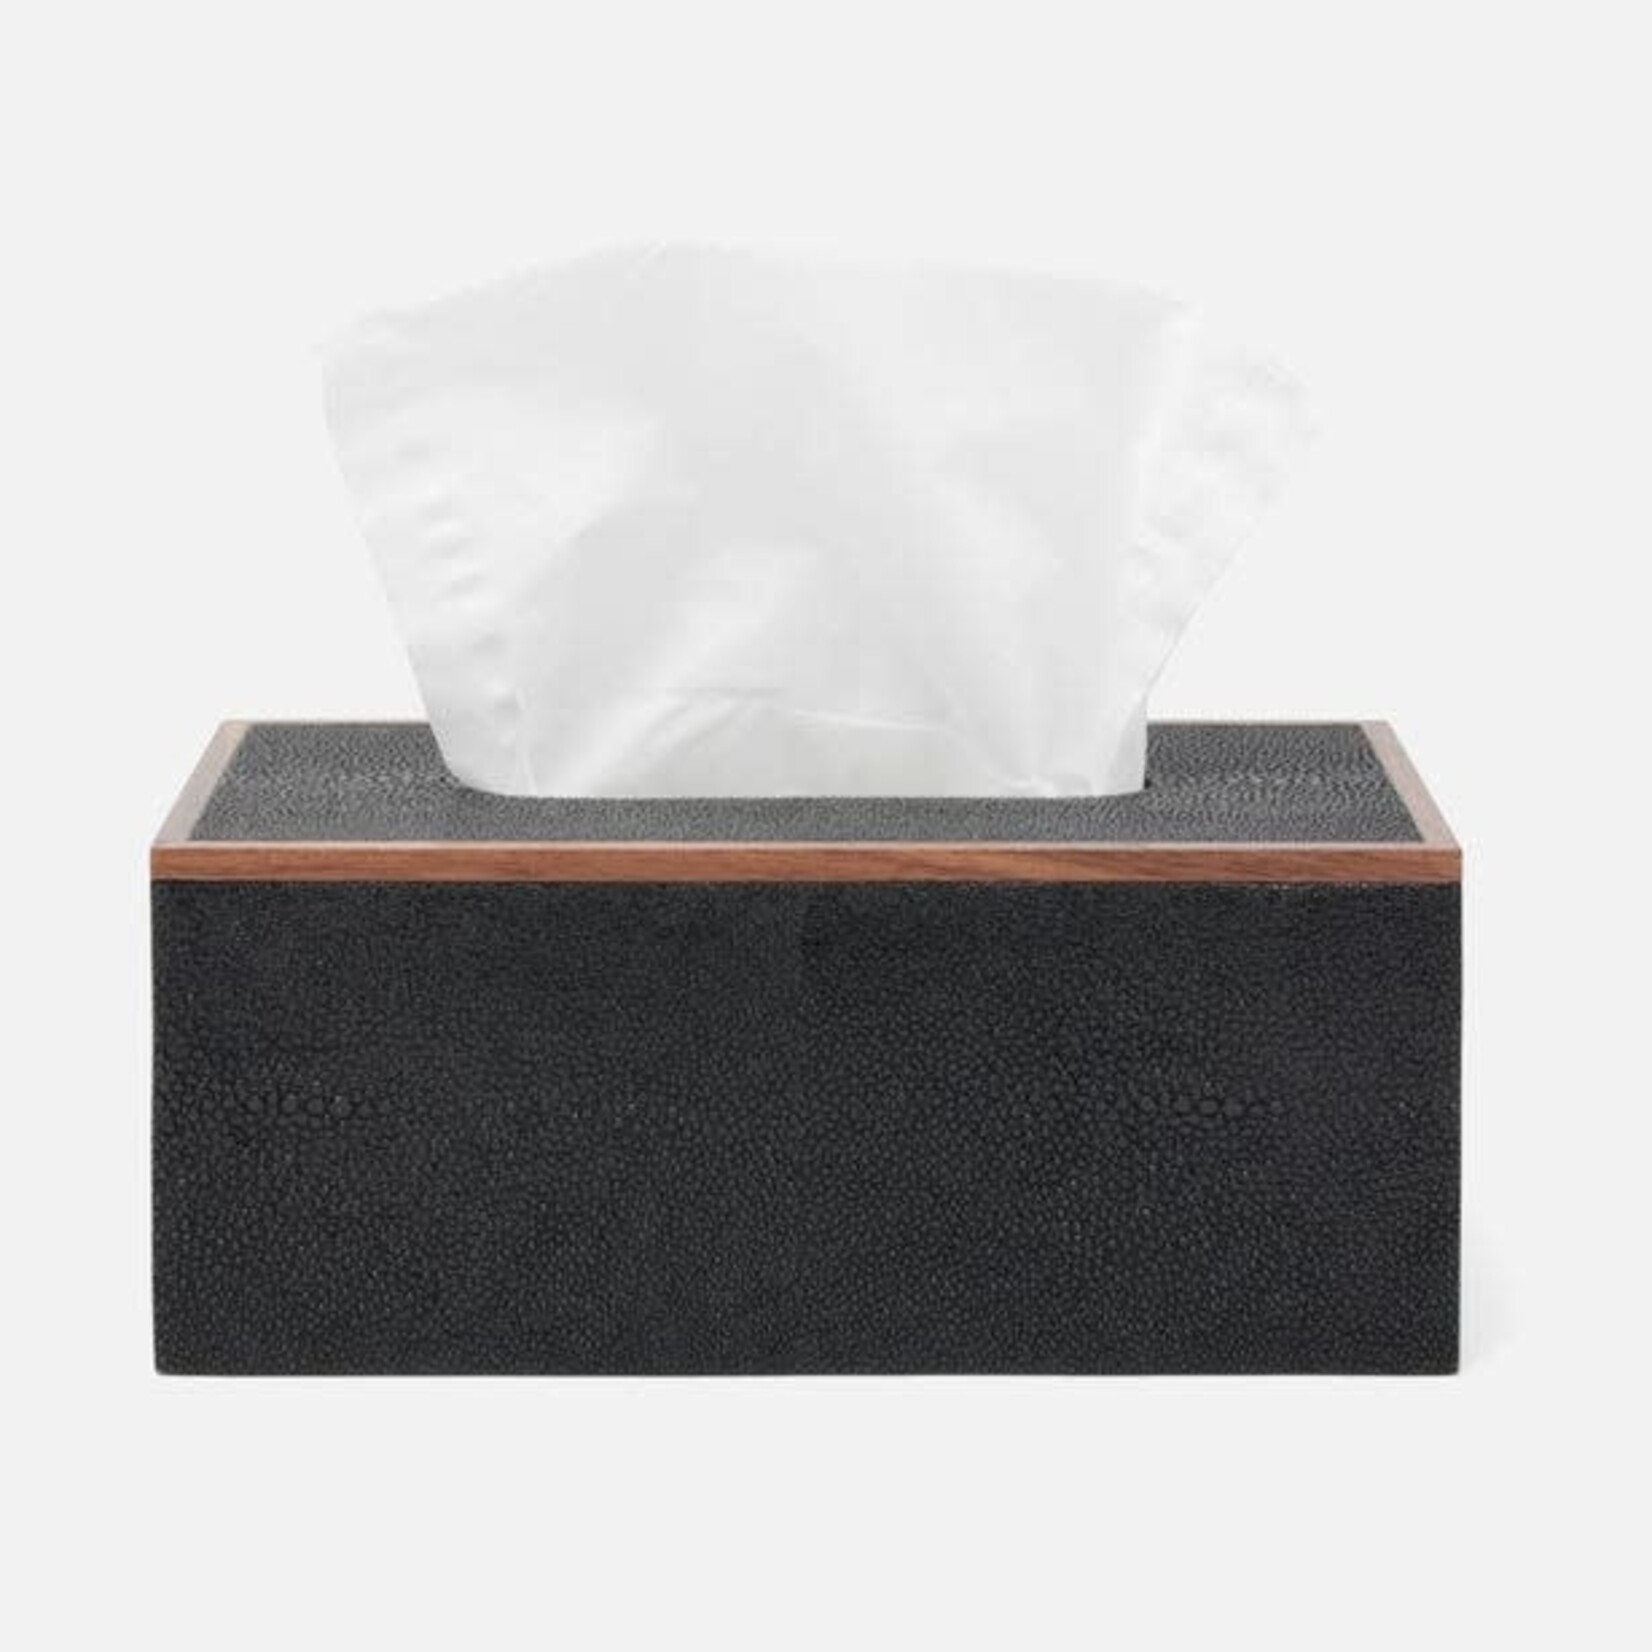 Pigeon and Poodle Manchester Rectangular Tissue Box Black Realistic Faux Shagreen